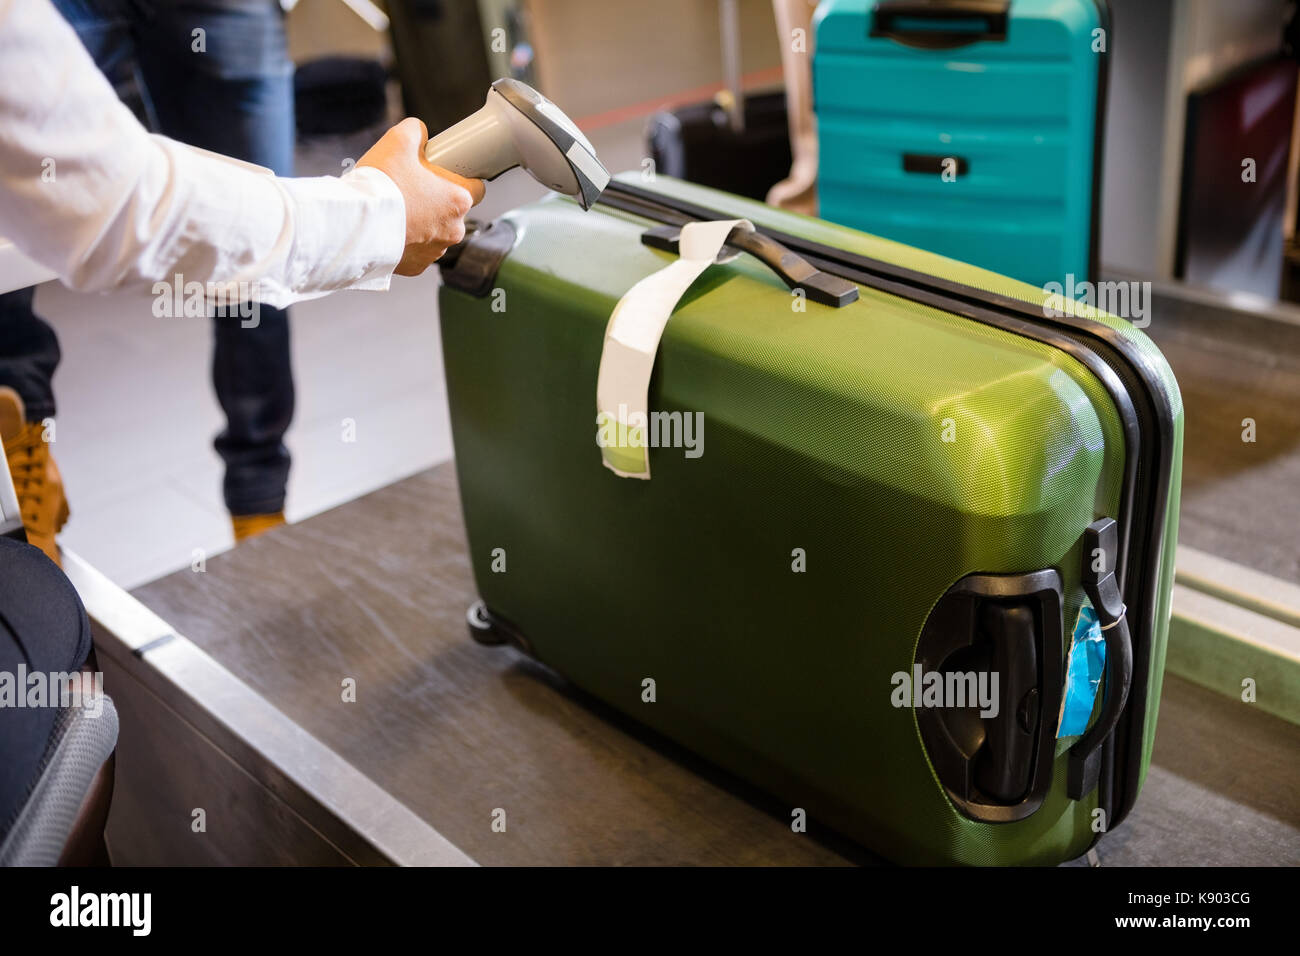 Woman Scanning Tag On Luggage At Airport Check-in Stock Photo